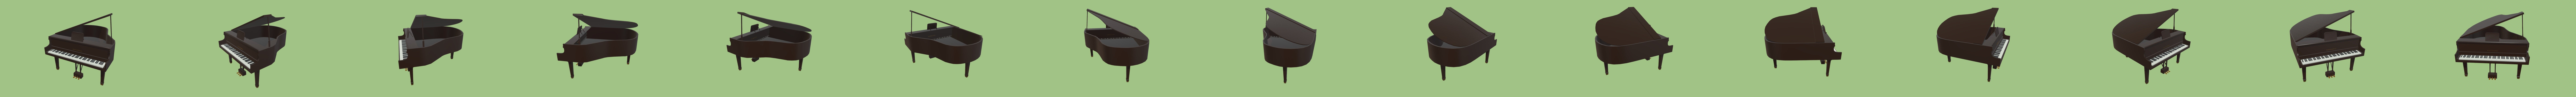 Grand Piano - Download Free 3D model by Amatsukast (@Amatsukast